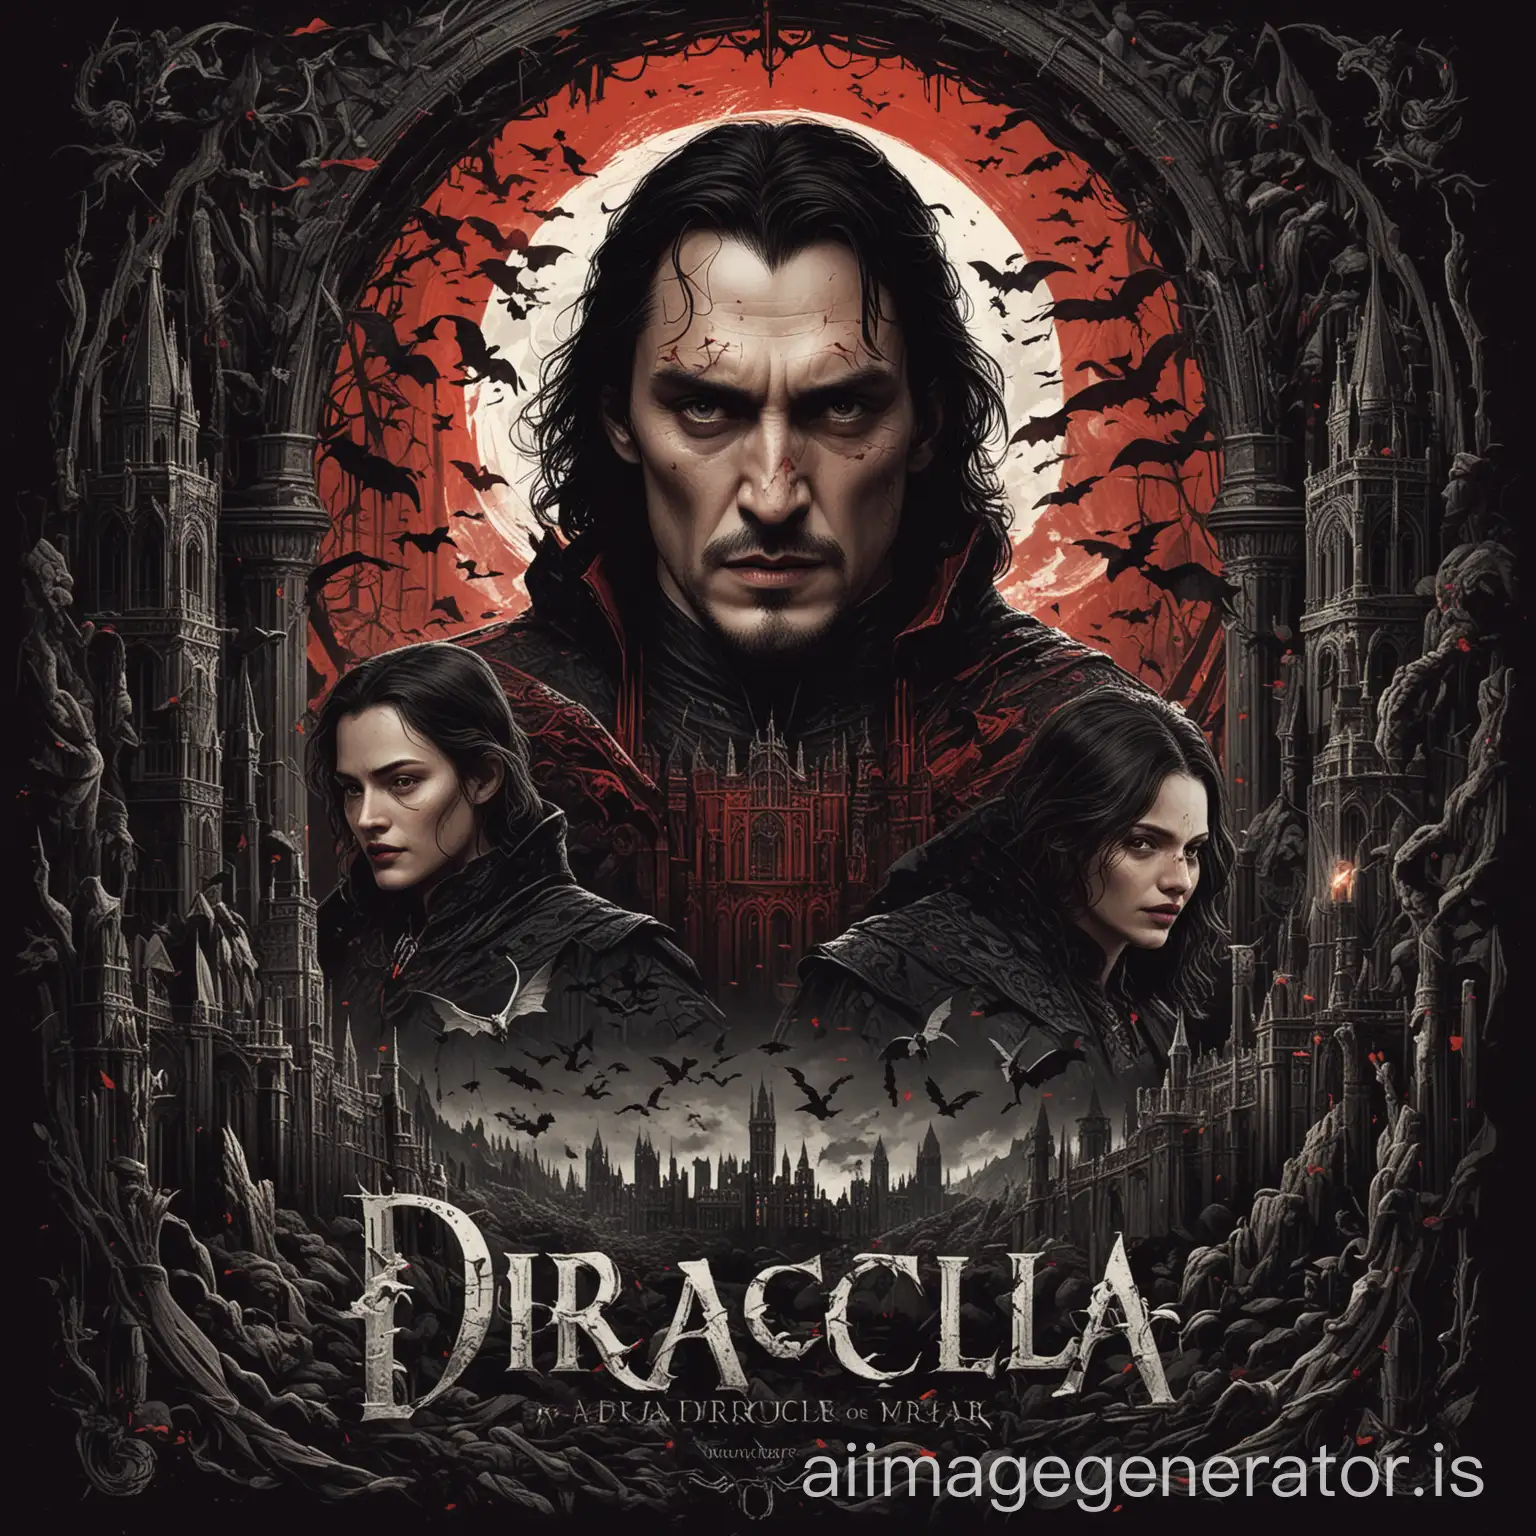 design inspired by the dark and mysterious world of Dracula Untold. Let our AI platform bring favorite movie to life with stunning vector graphics and intricate details.